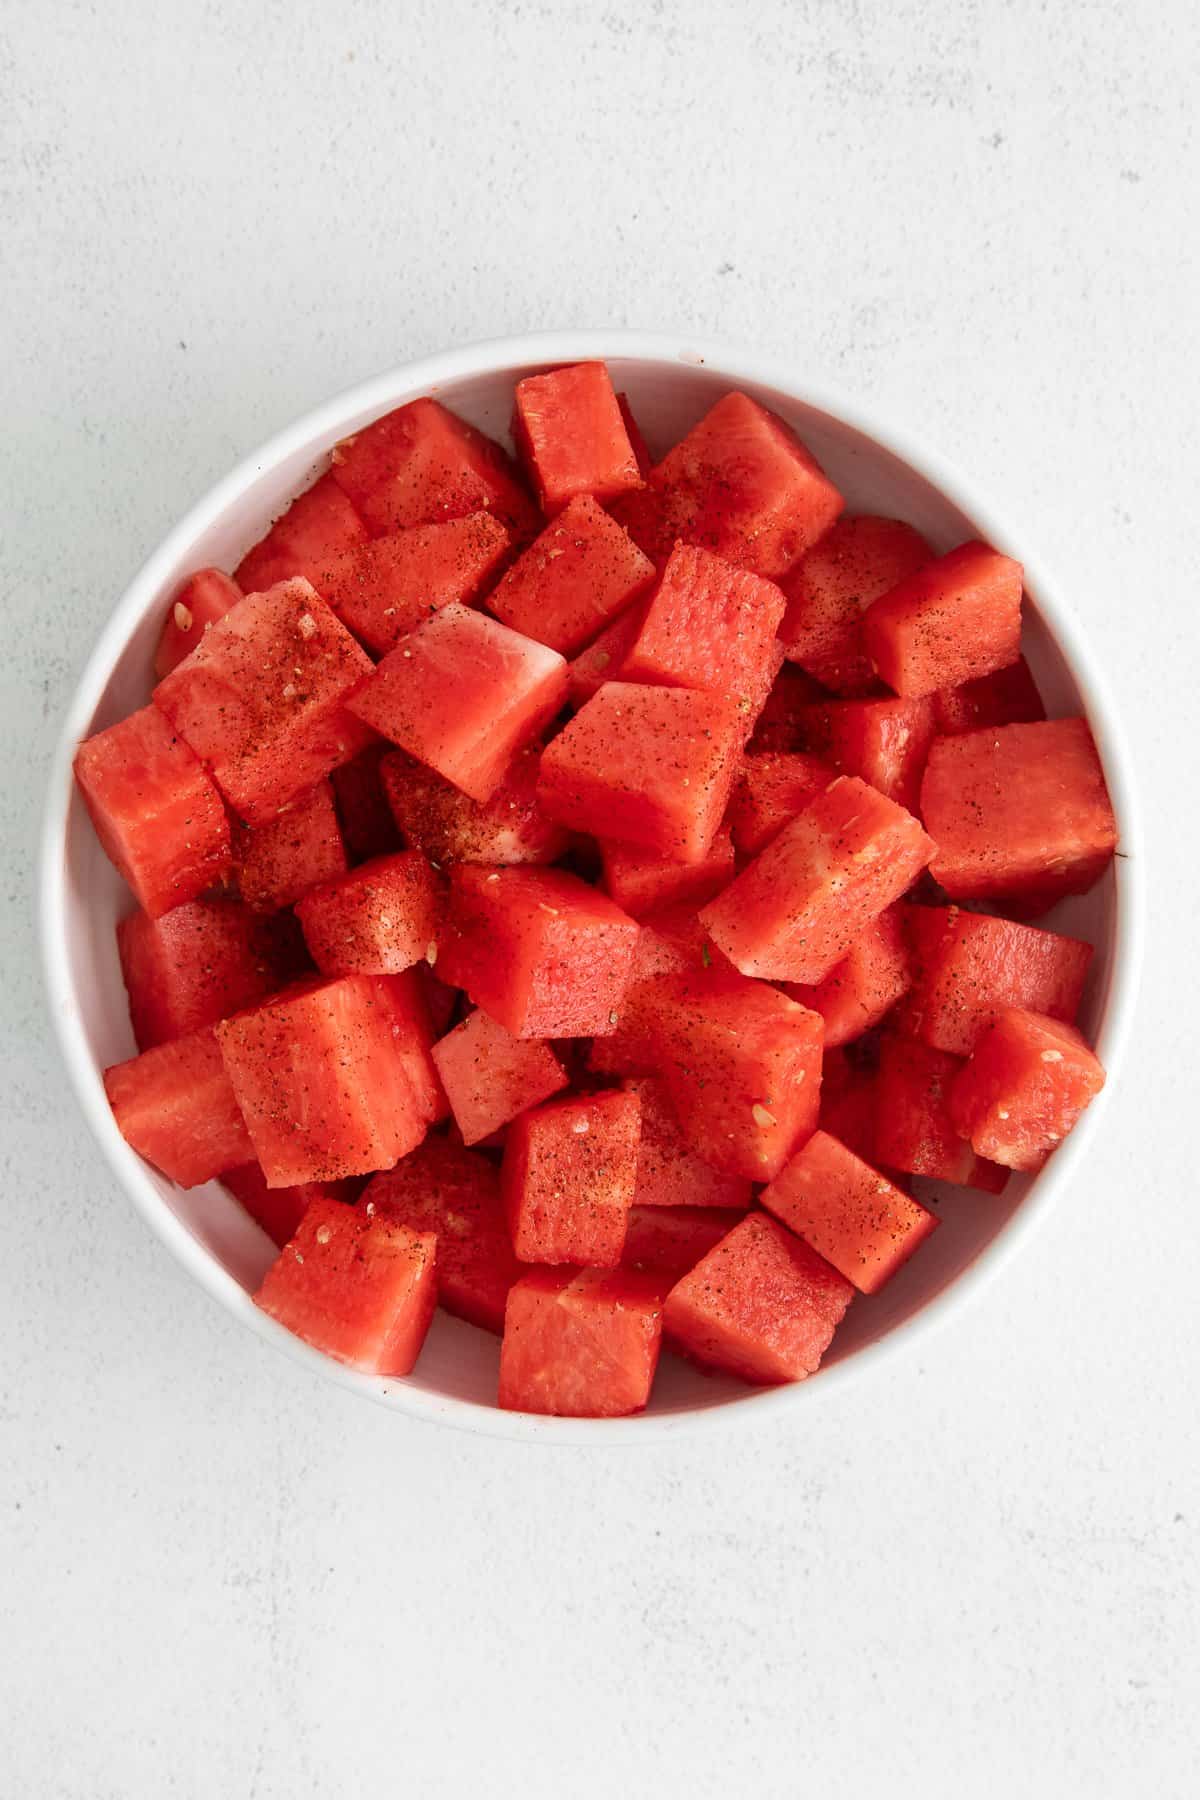 diced watermelon in bowl.